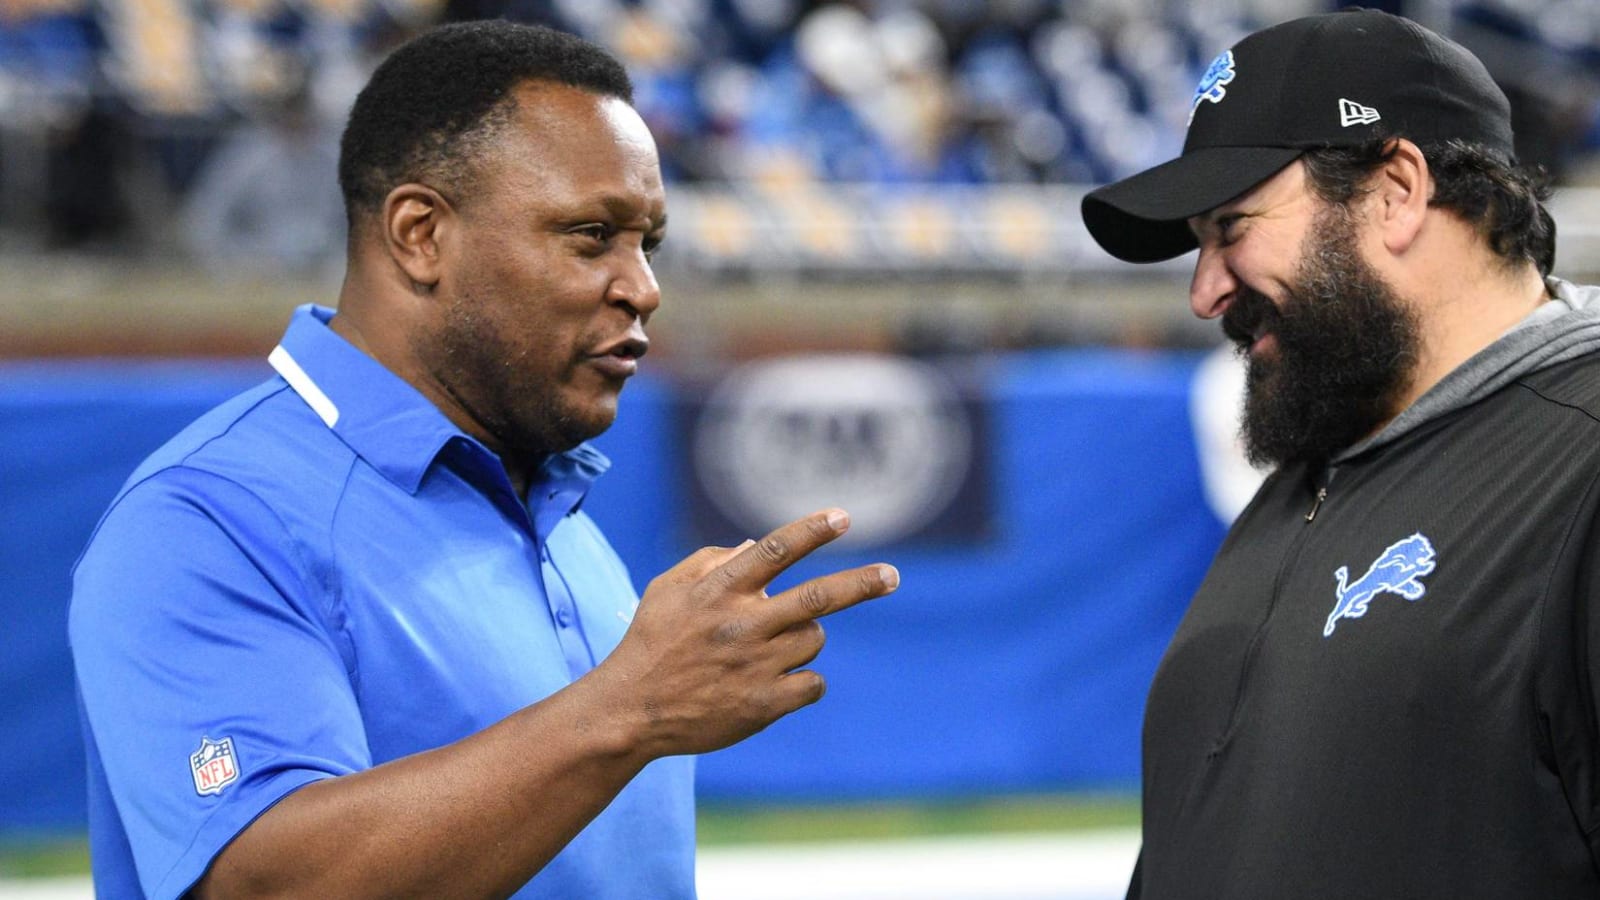 Barry Sanders reacts to comically erroneous Garth Brooks scandal